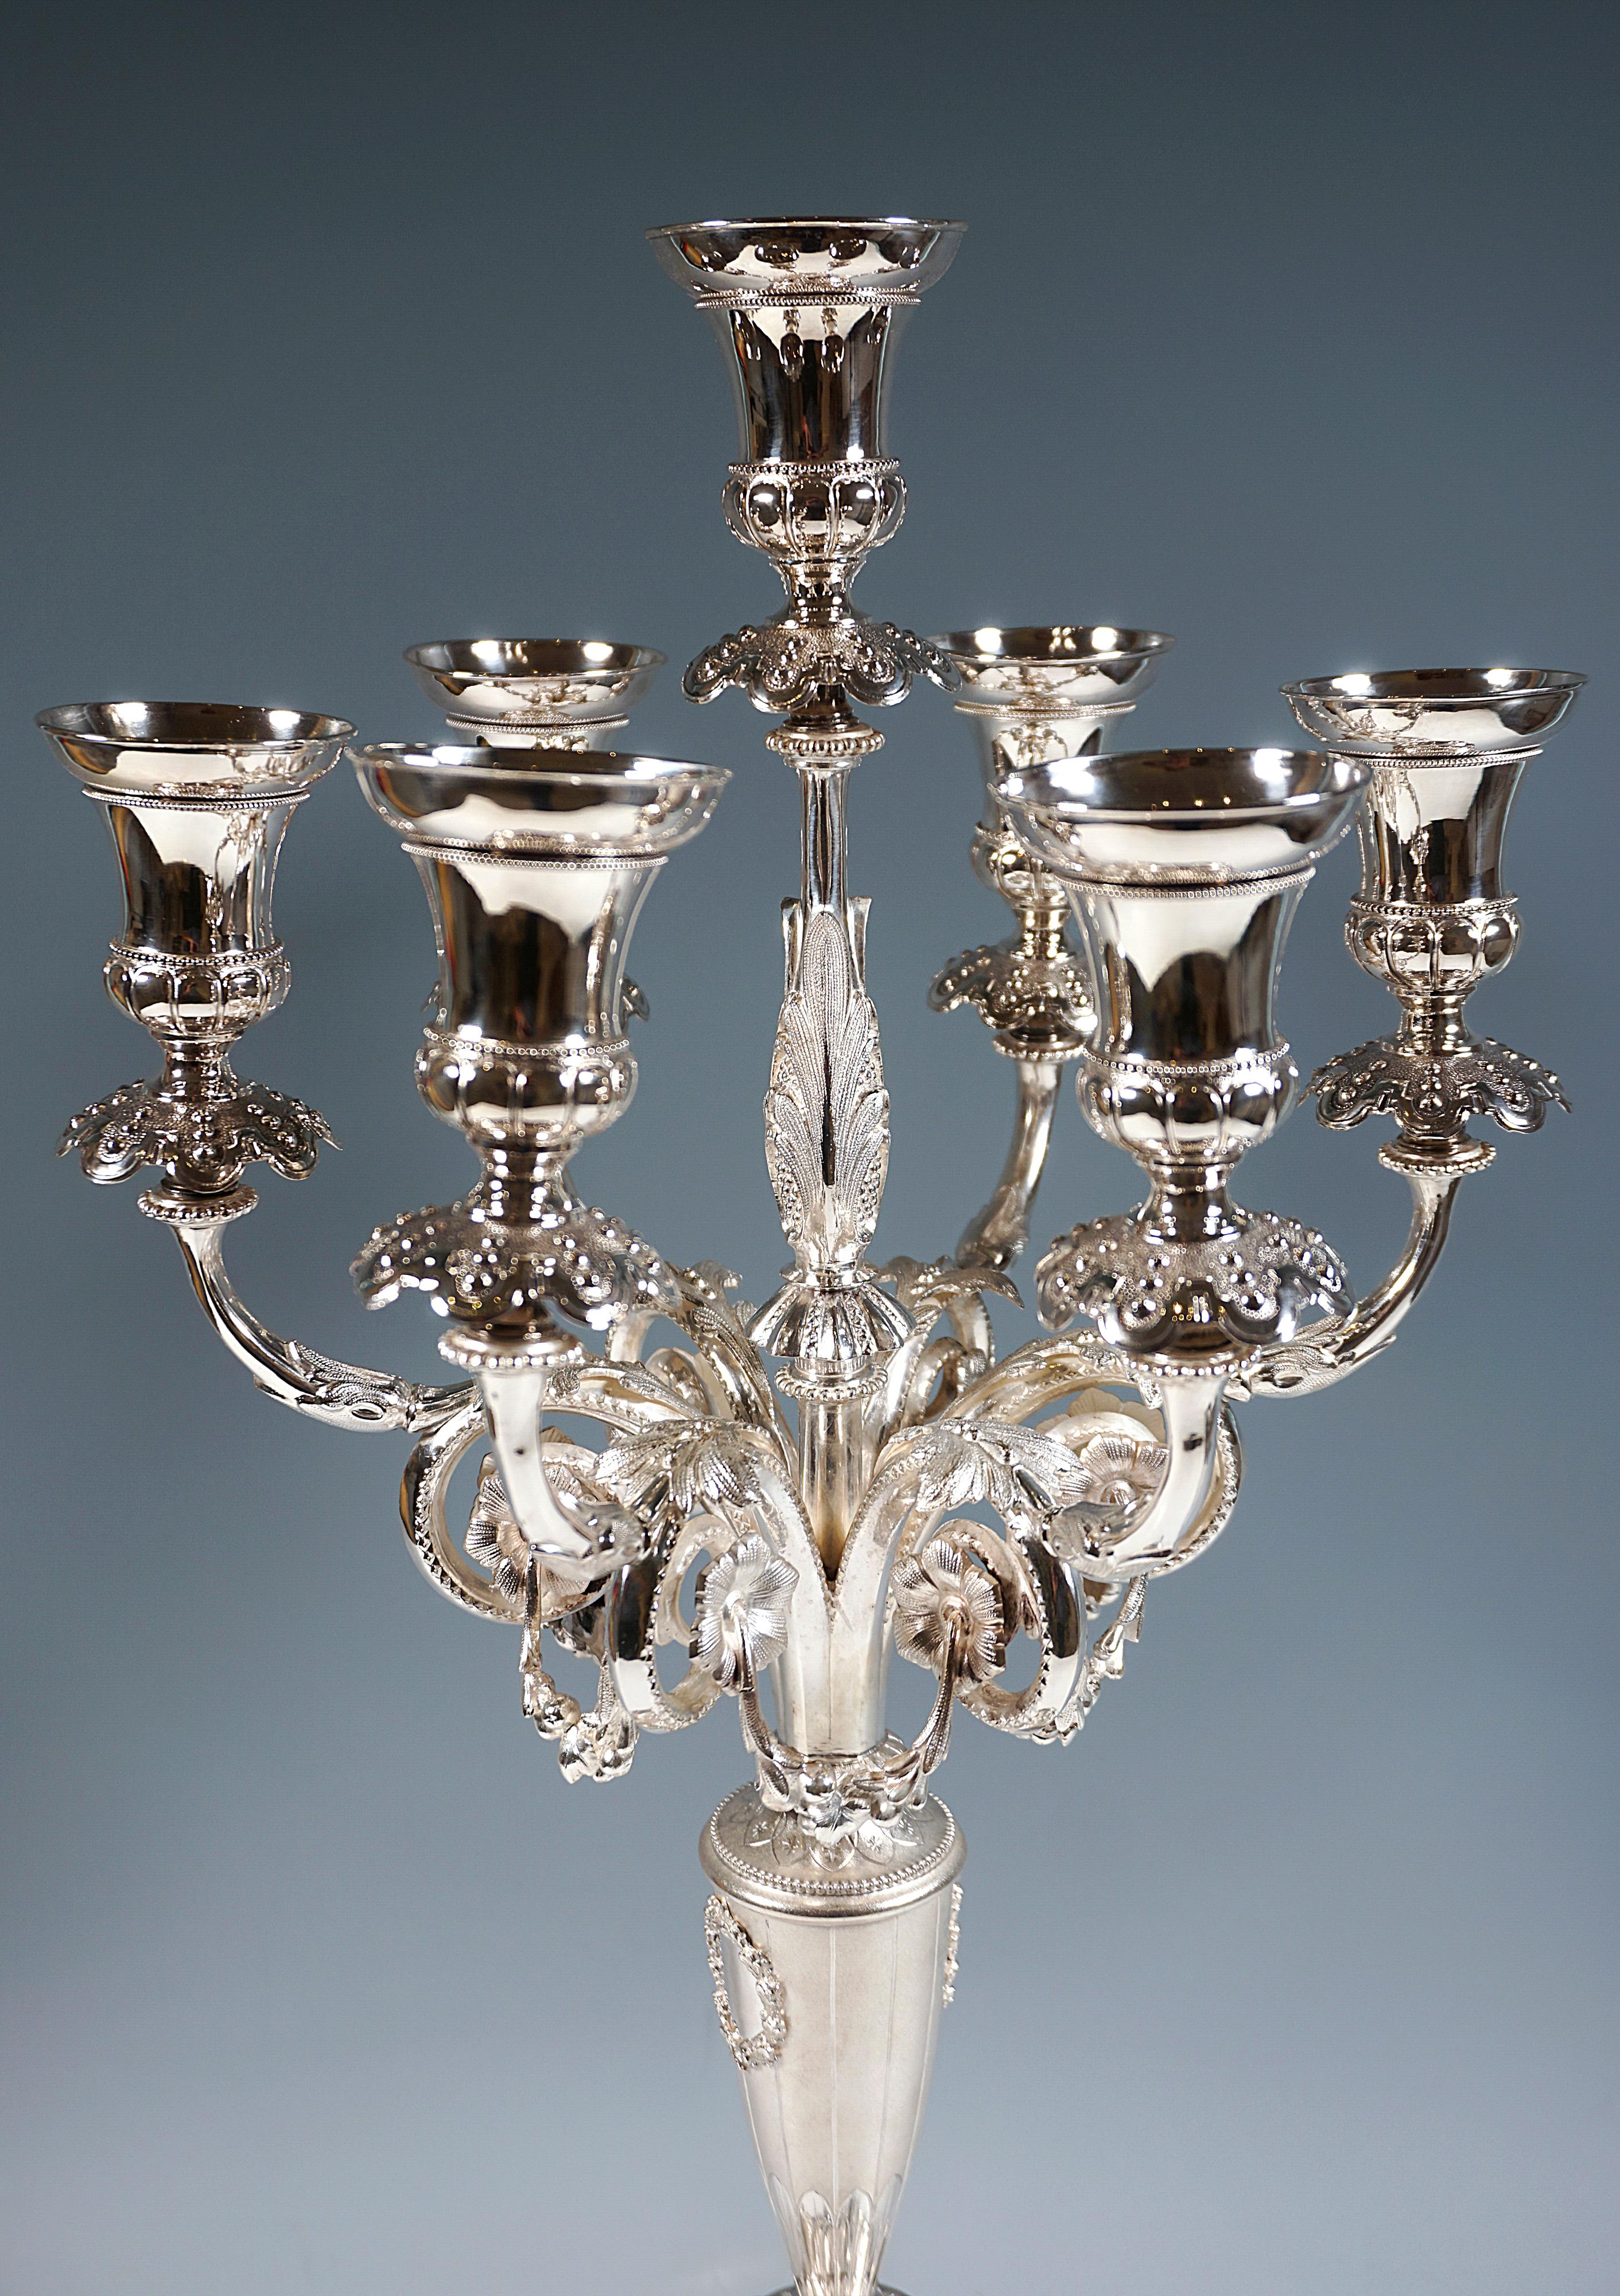 Rococo Revival Pair Of 7-Flame Silver Candelabras With Dolphins, Wilkens & Sons Germany, 1877